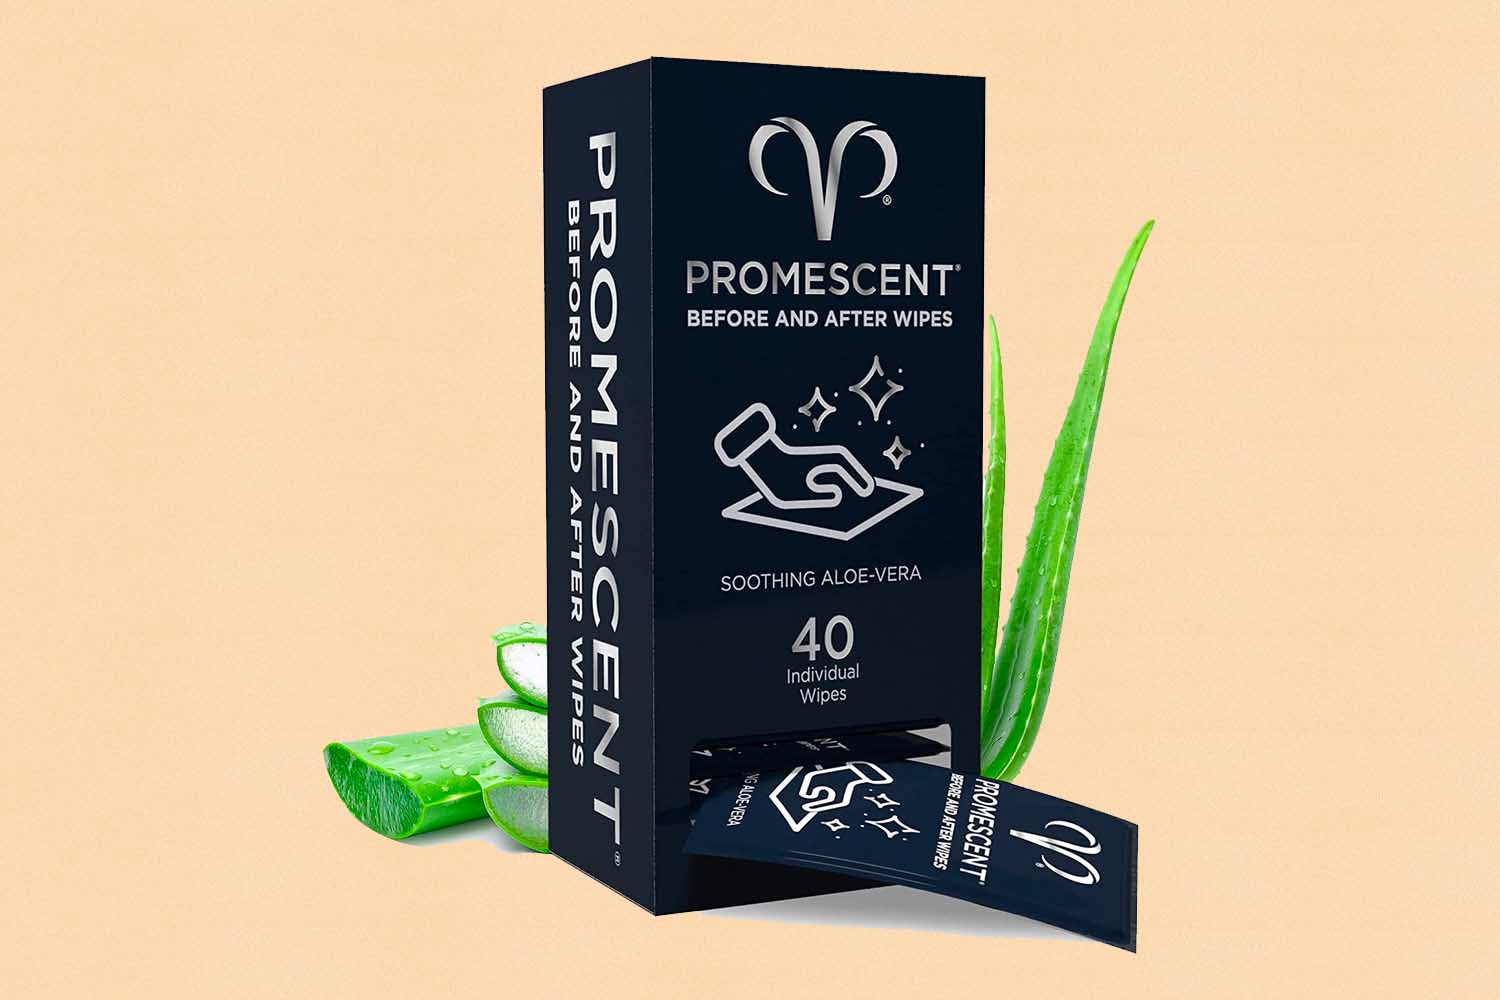 Promescent Flushable Wipes for Adults